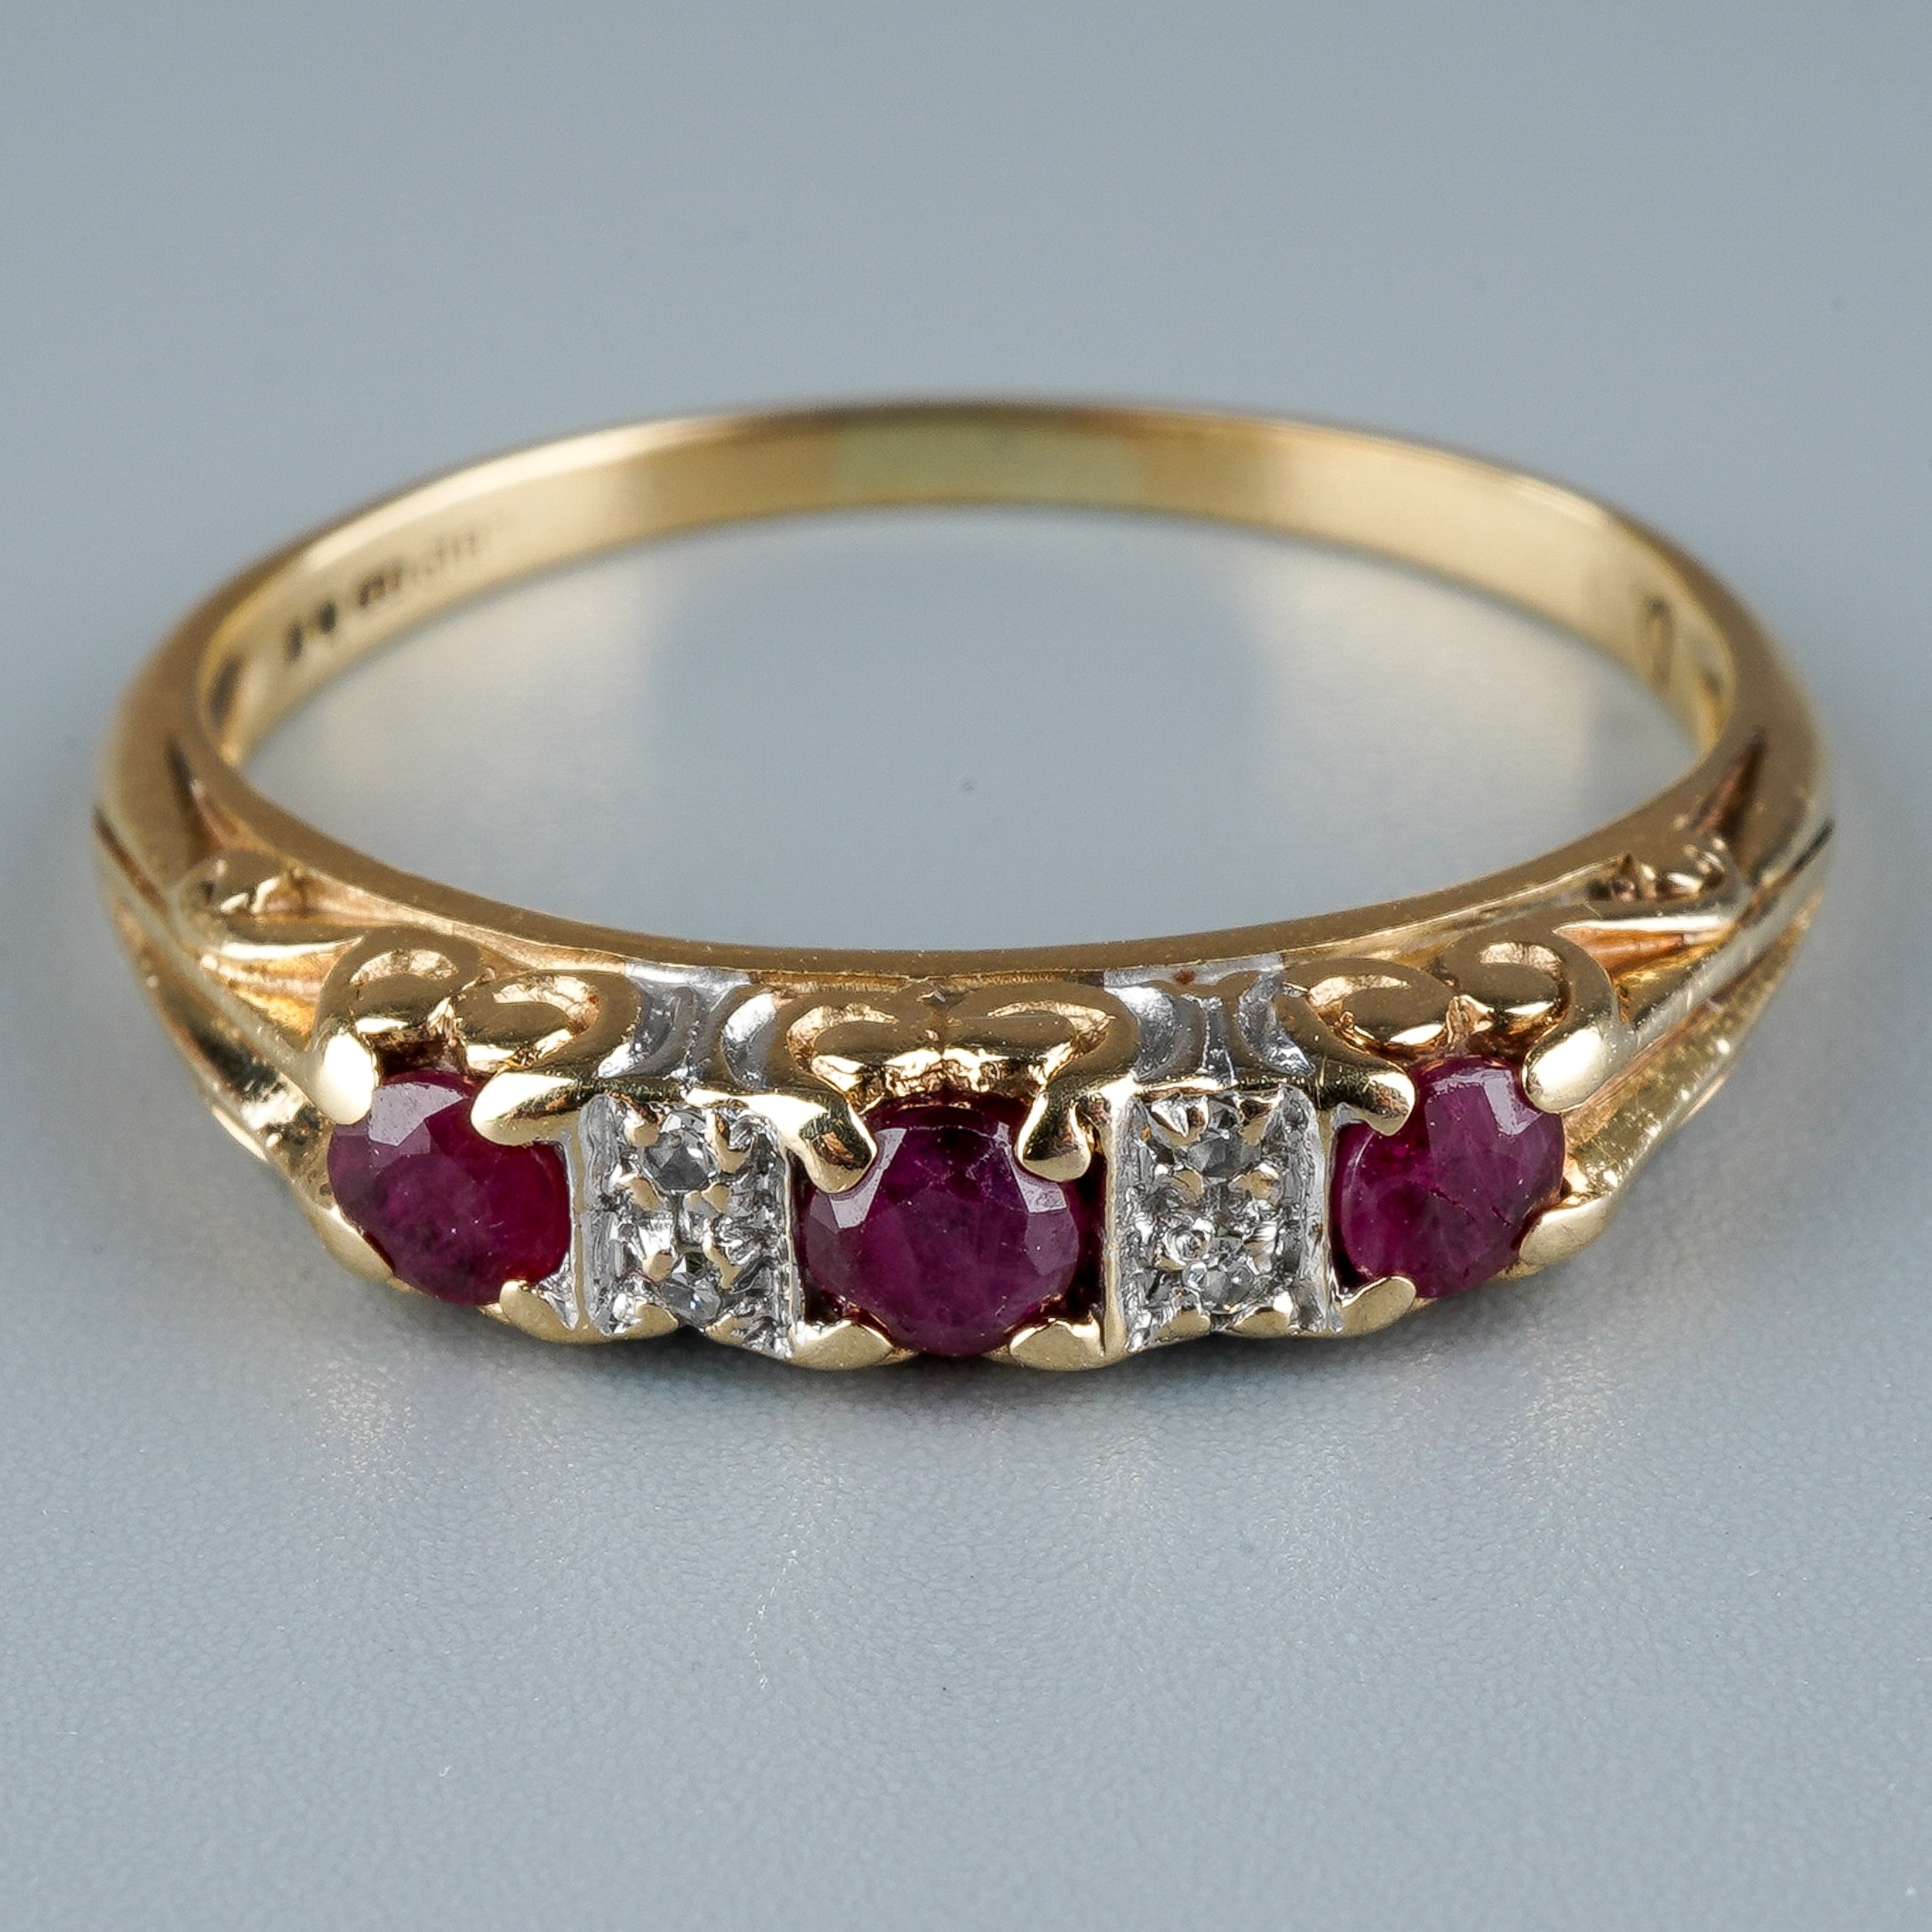 A 9ct yellow gold ruby and diamond ring, set with three round-cut rubies with diamond-chip - Image 2 of 6